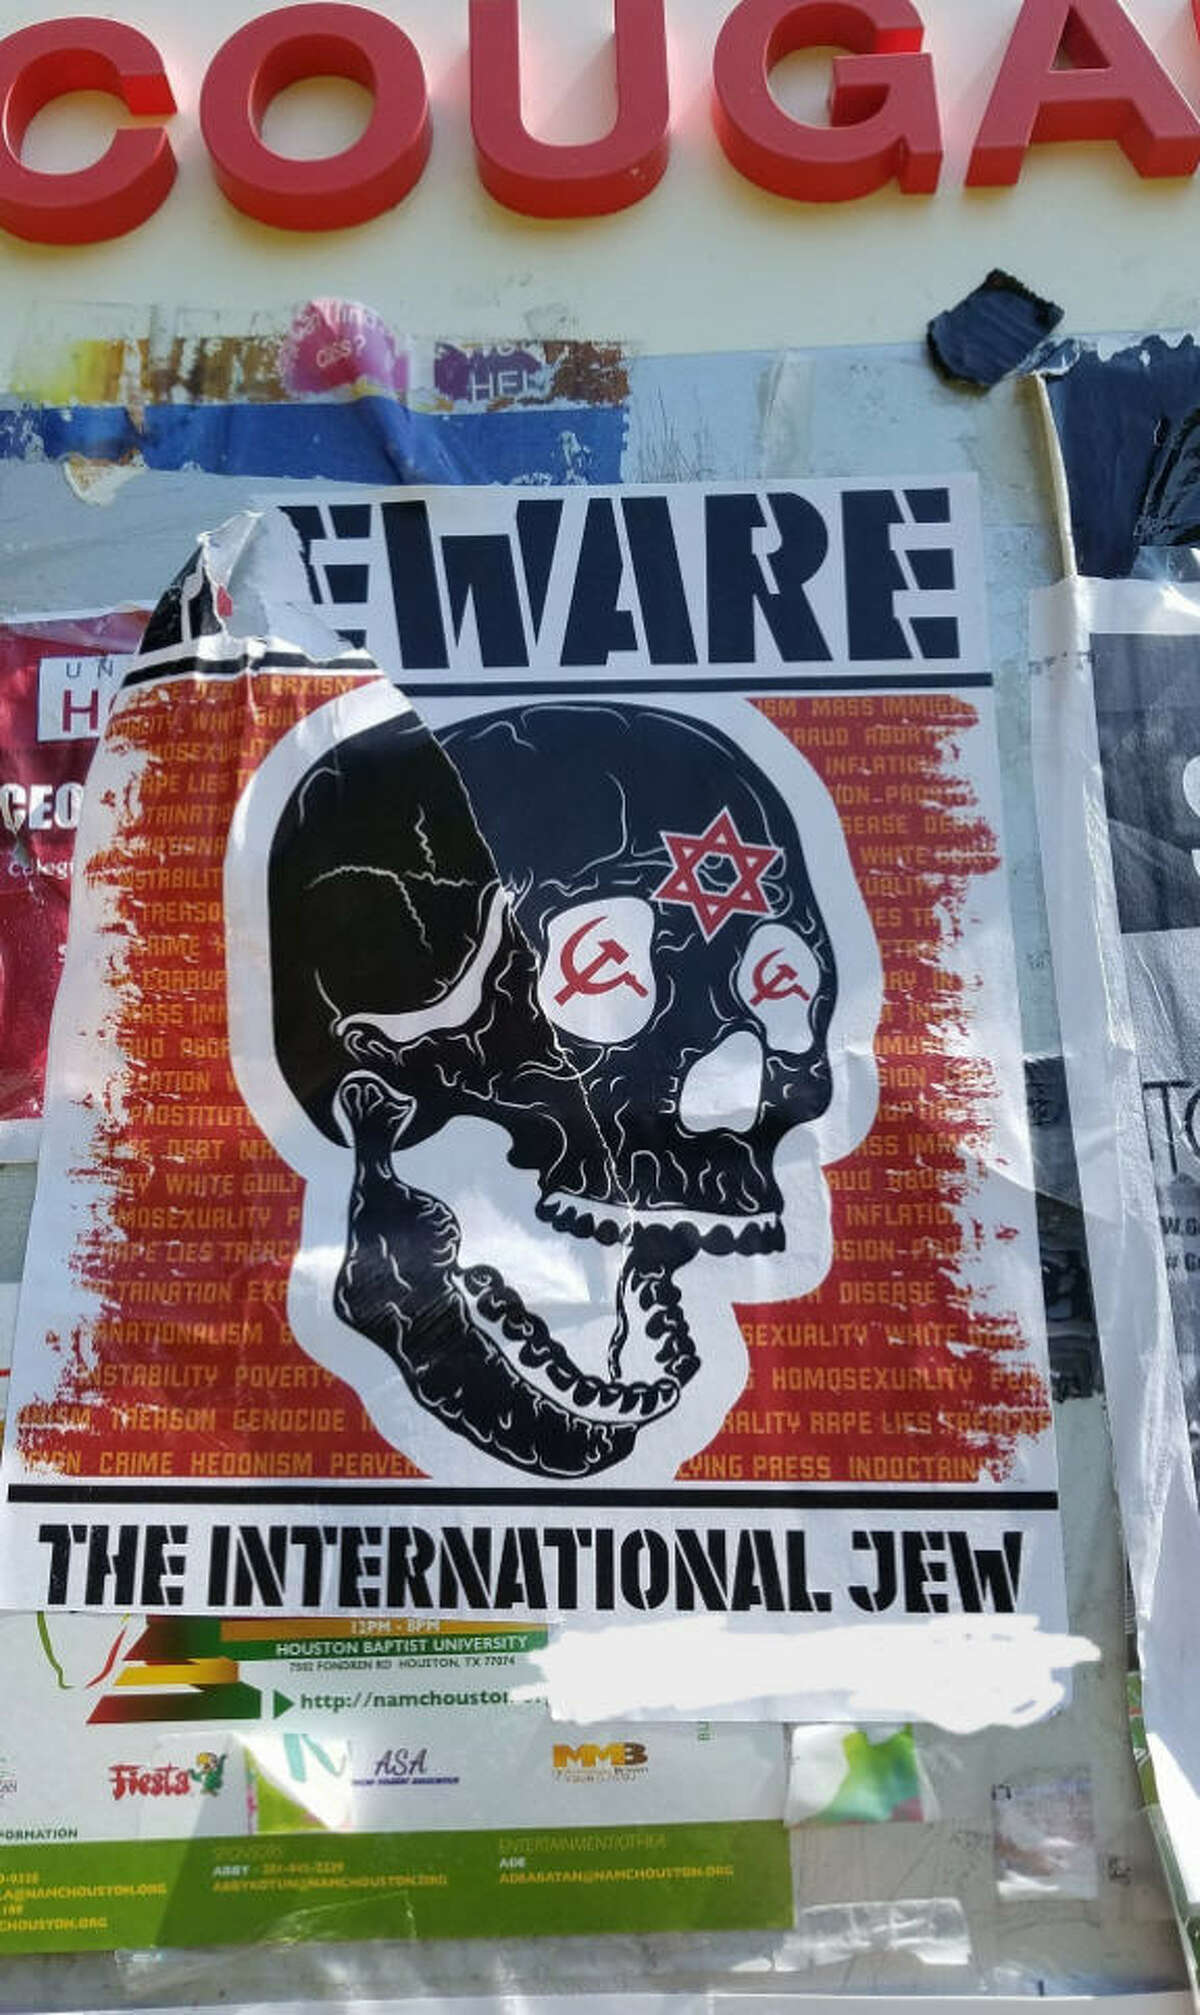 Vanguard America comes to Houston A University of Houston student reported finding "neo-Nazi propaganda" posters on the University of Houston campus in September 2017. The posters are linked to American Vanguard, a white supremacist group that posts fliers on college campuses across the country. Read more: Chron.com